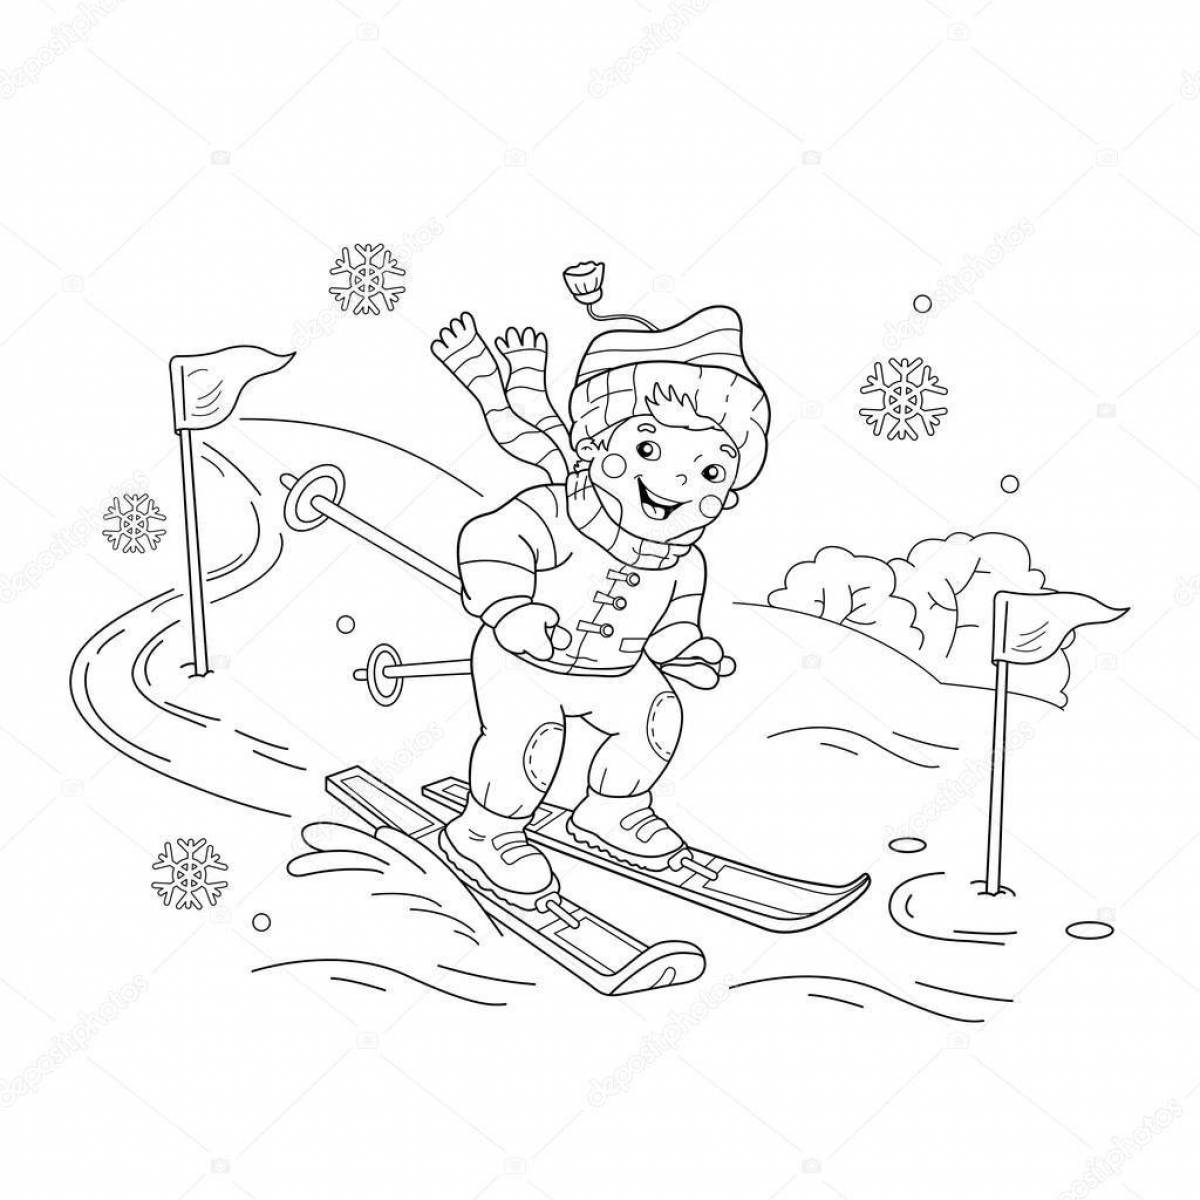 Inspirational winter sports coloring book for 6-7 year olds